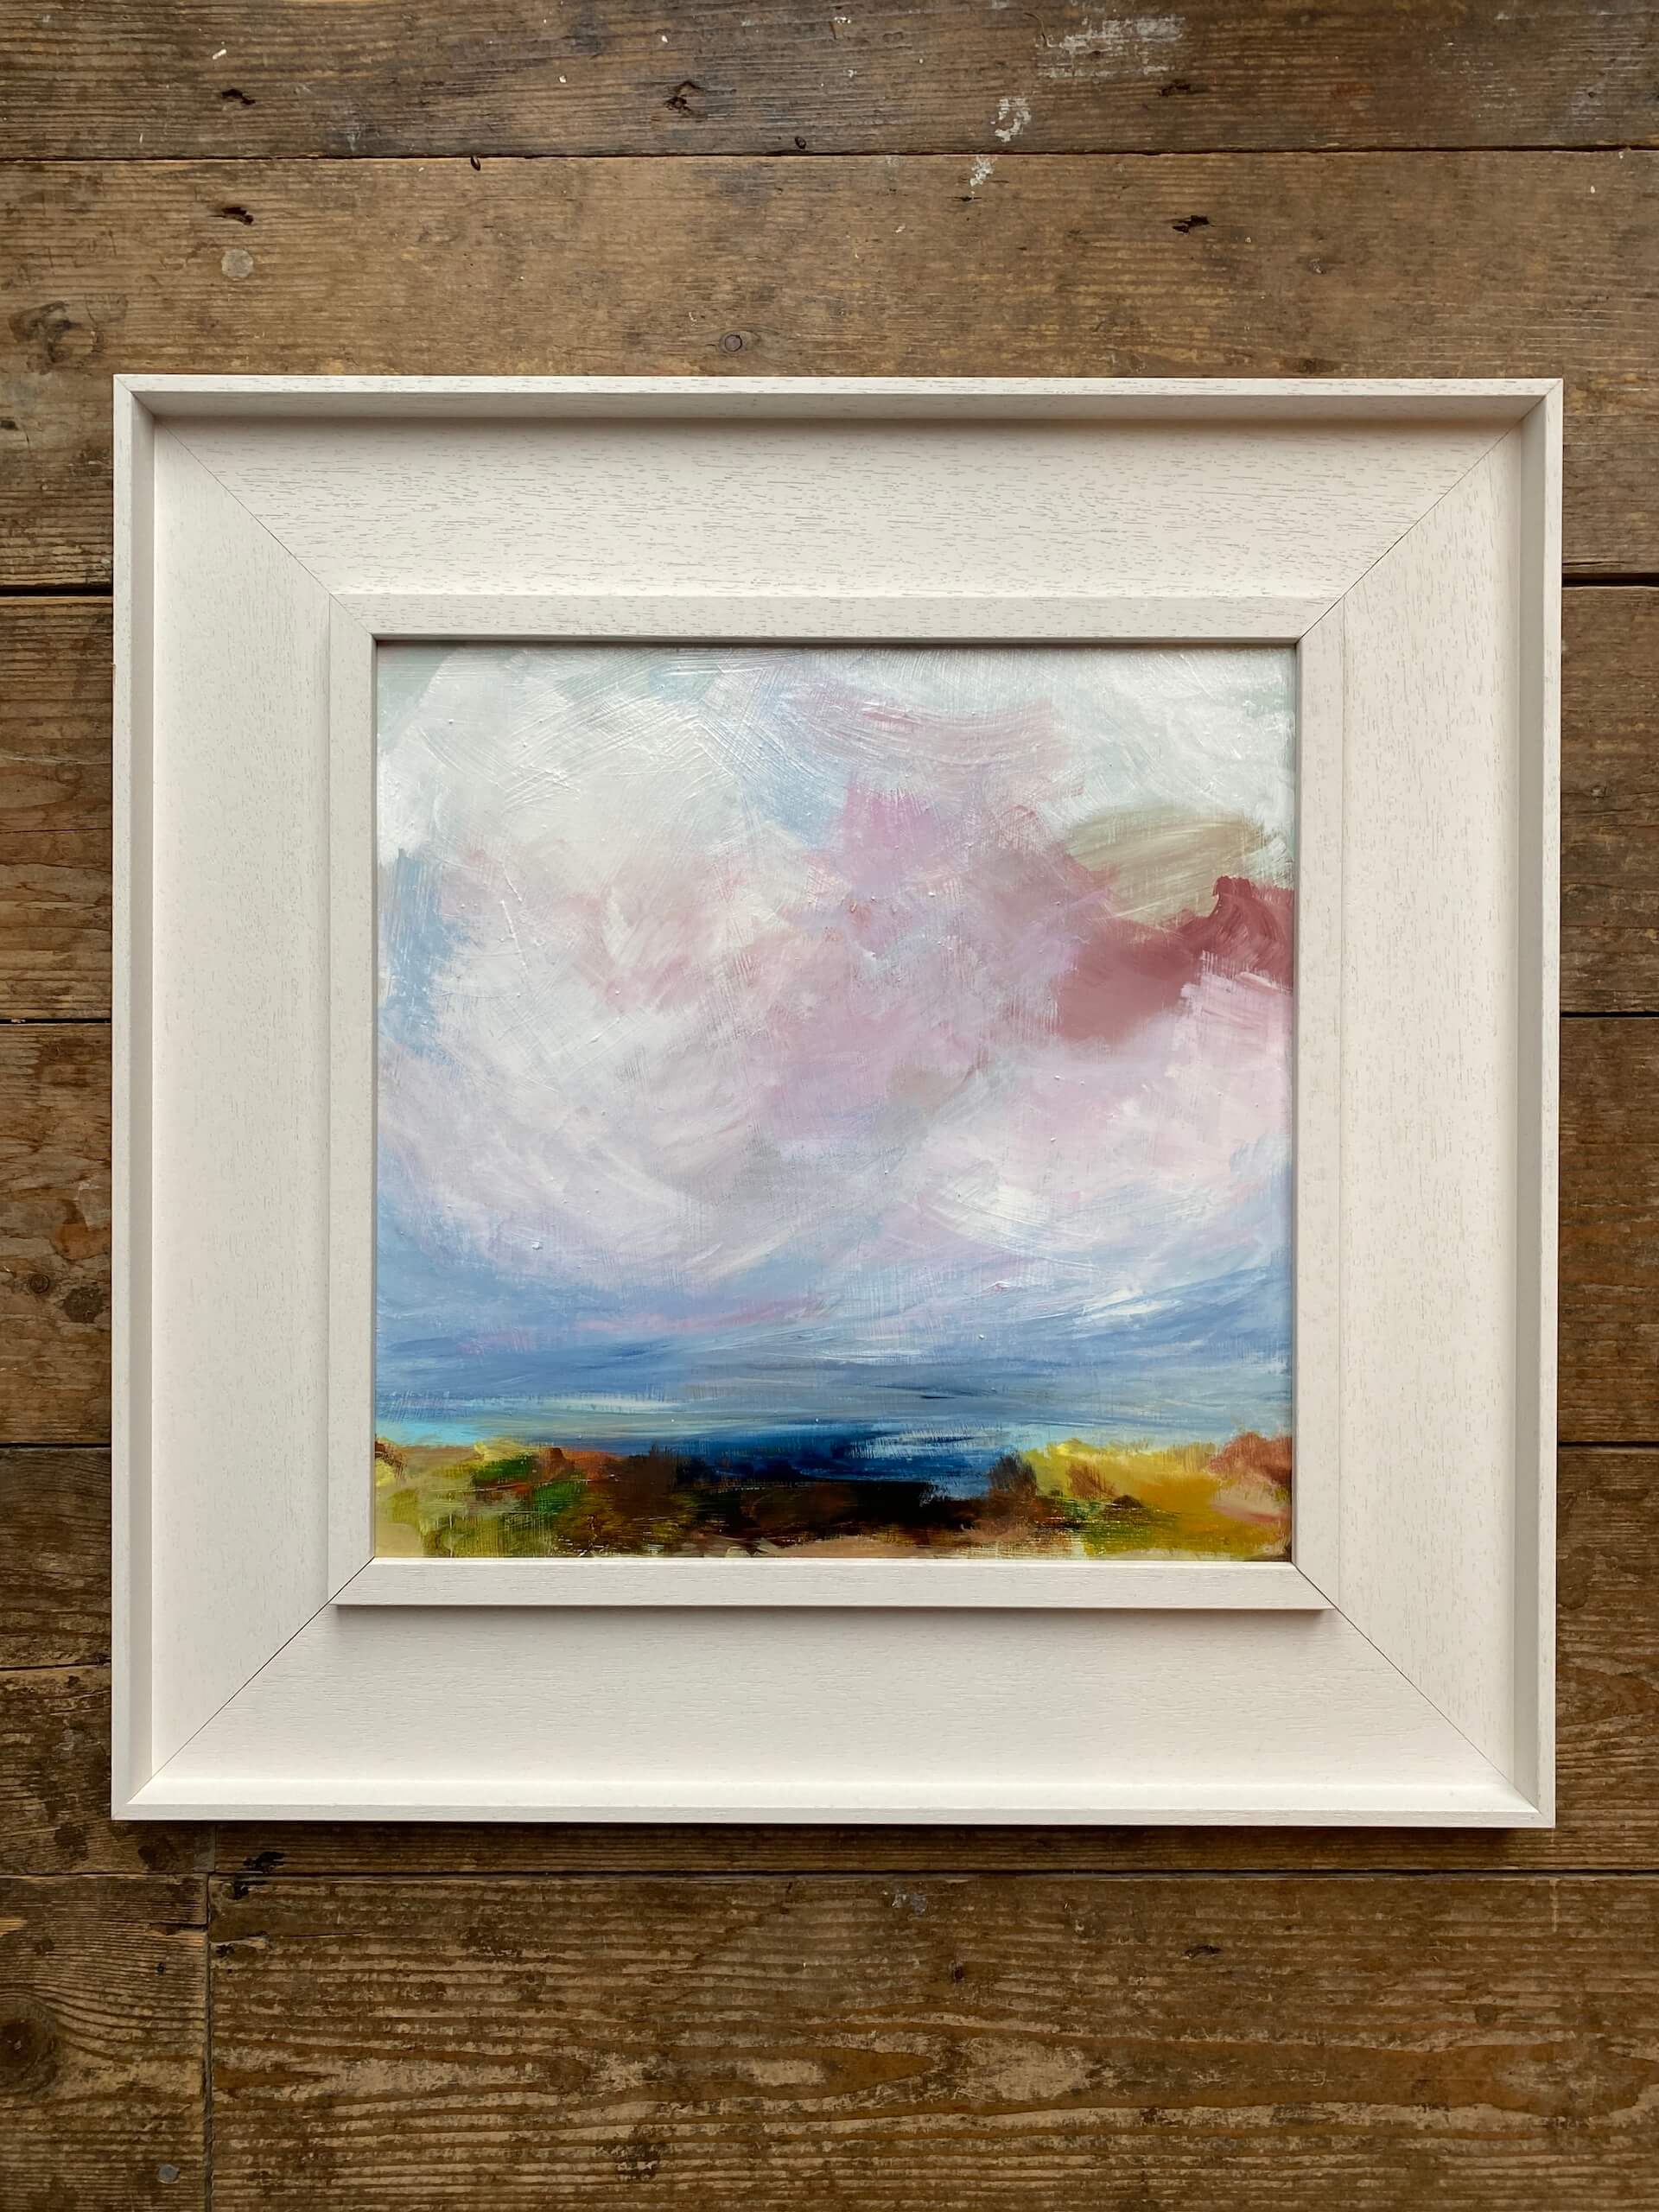 The Mysterious case of the pink cloud 2, 30 x 30cm Acrylic on Canvas